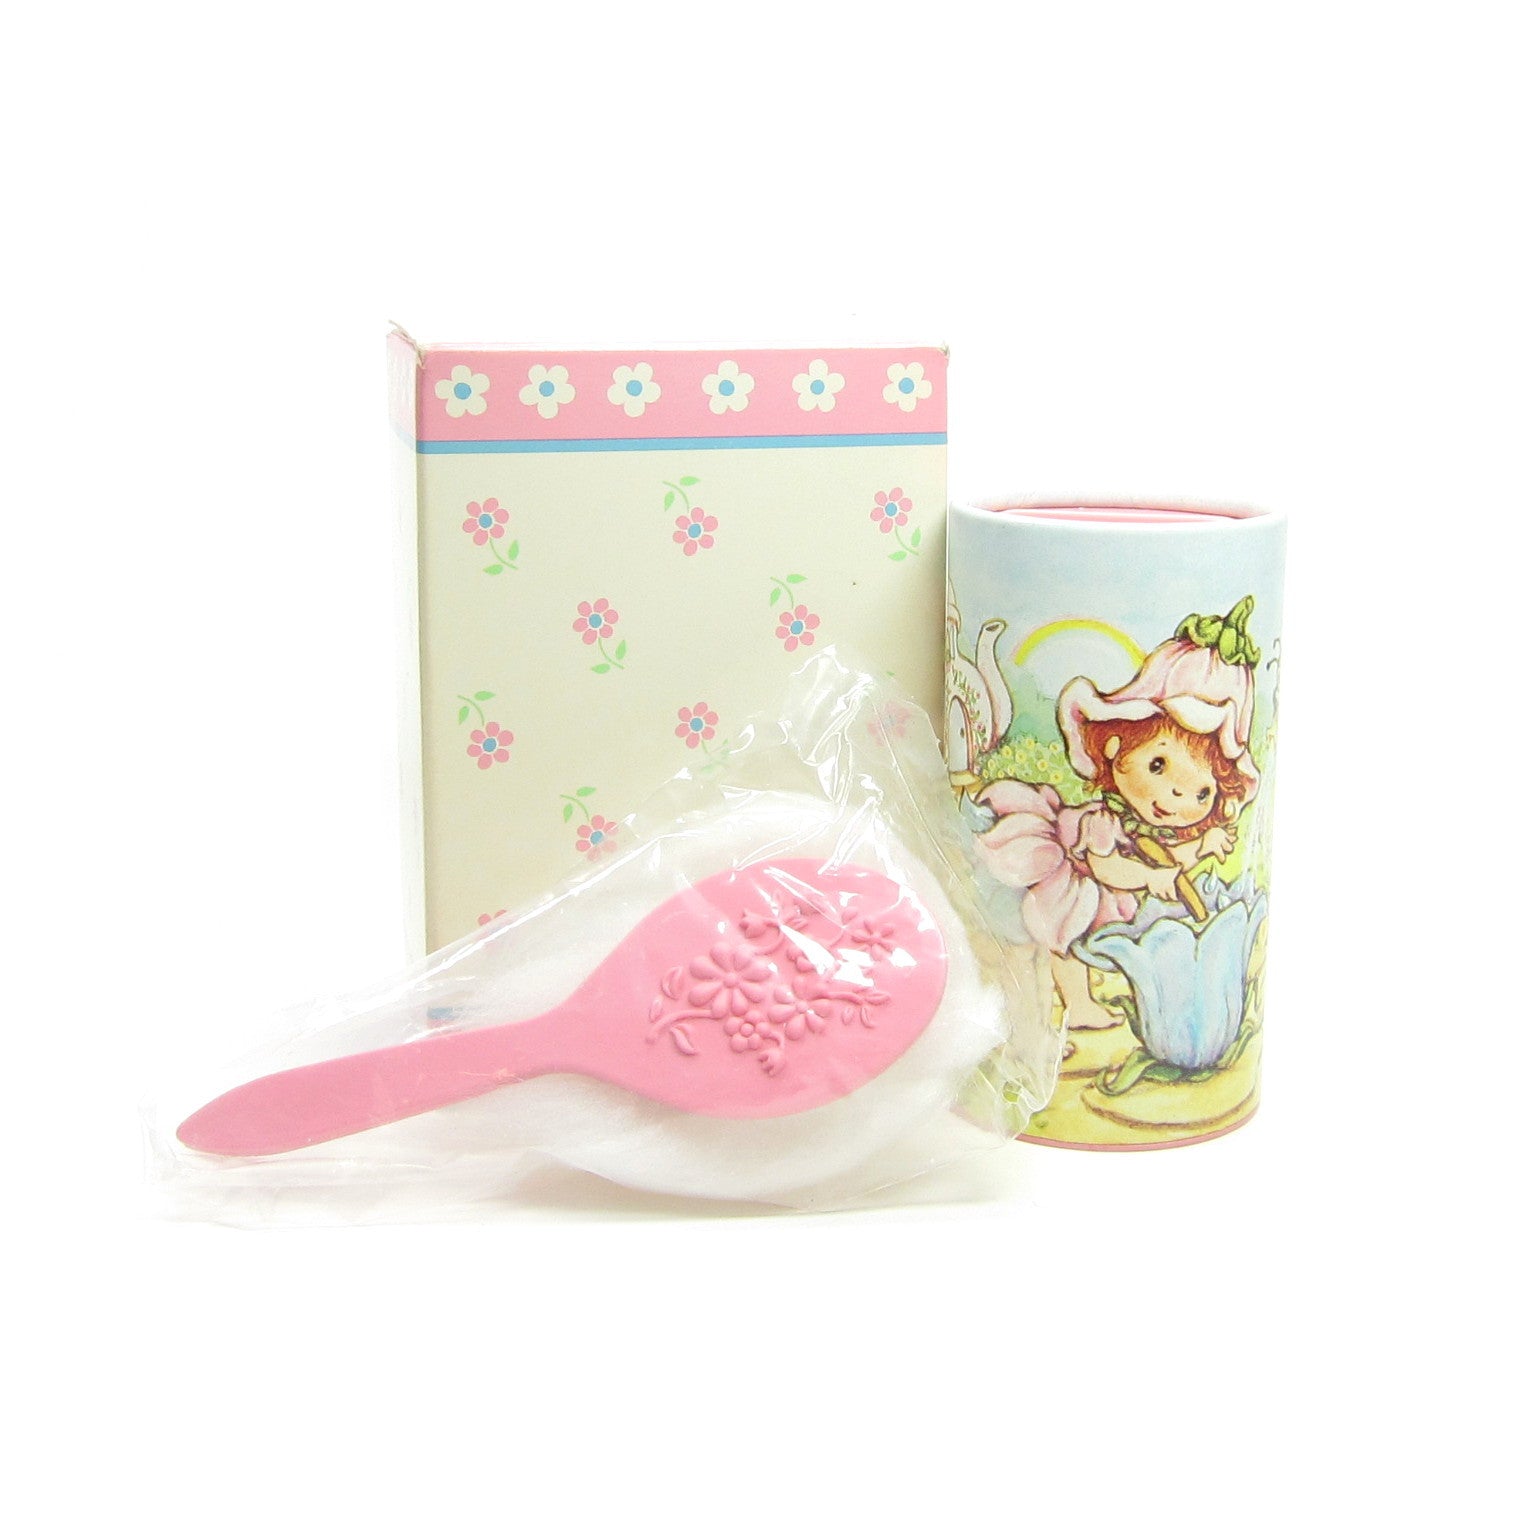 Little Blossom Whisper Soft Talc with Puff